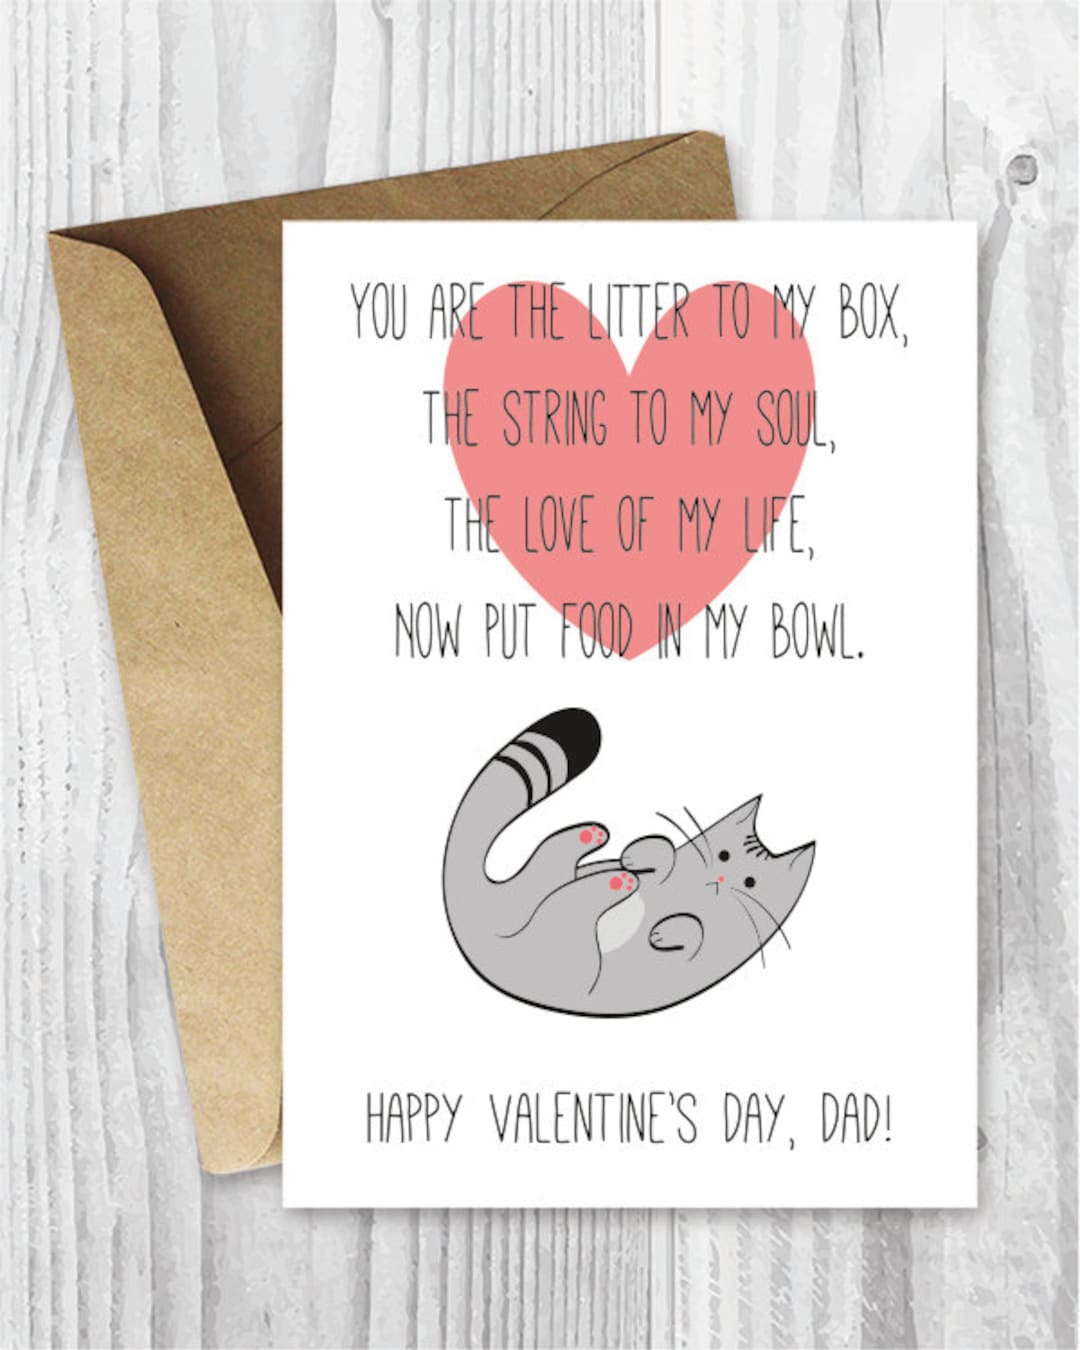 Cat Valentines Box. Need to change it up a bit, but it's somewhere